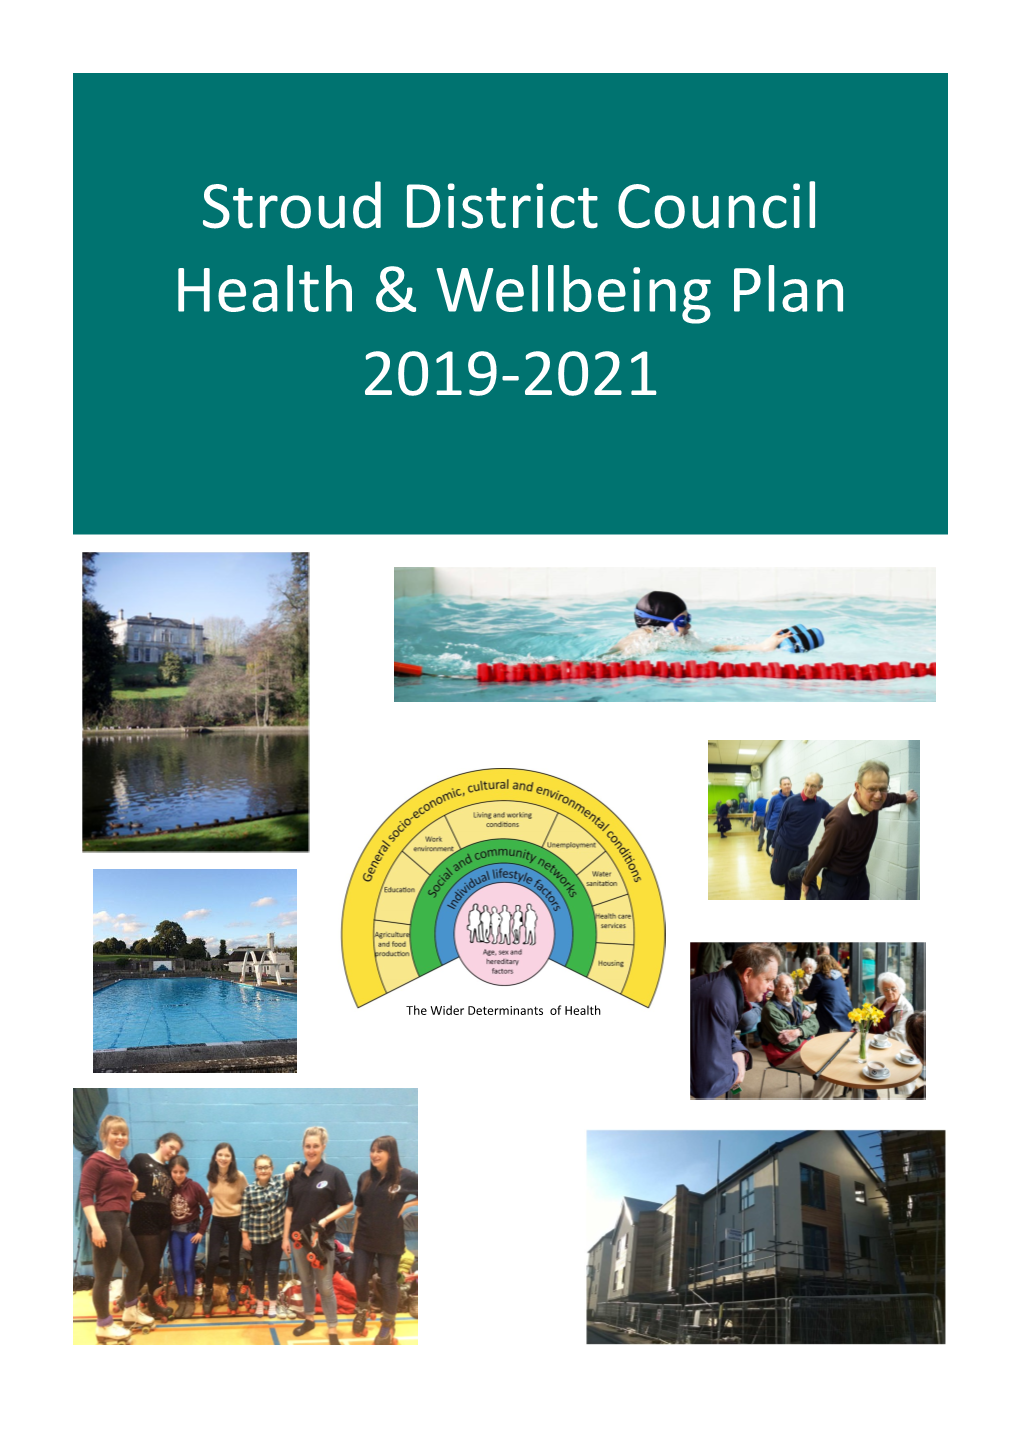 Stroud District Council Health & Wellbeing Plan 2019-2021